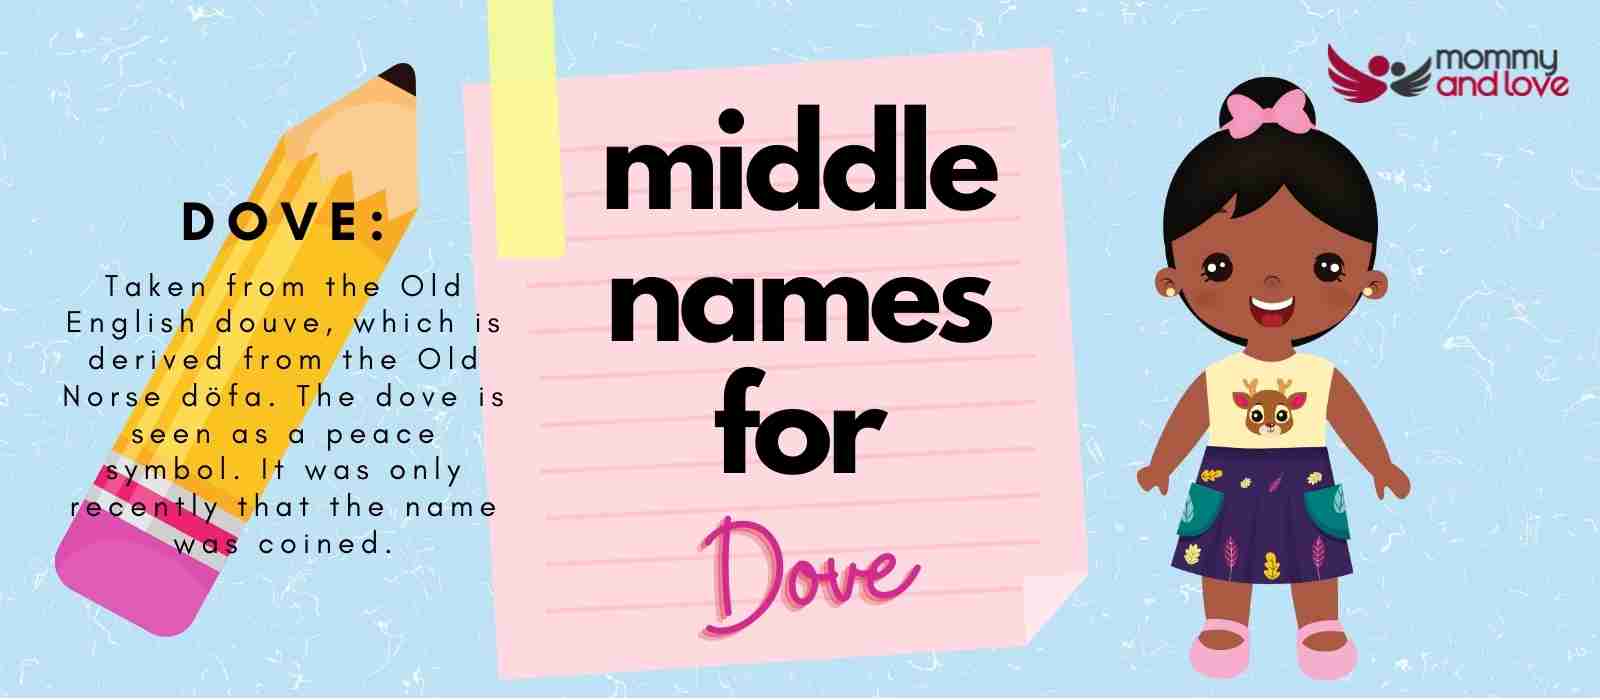 Middle Names for Dove